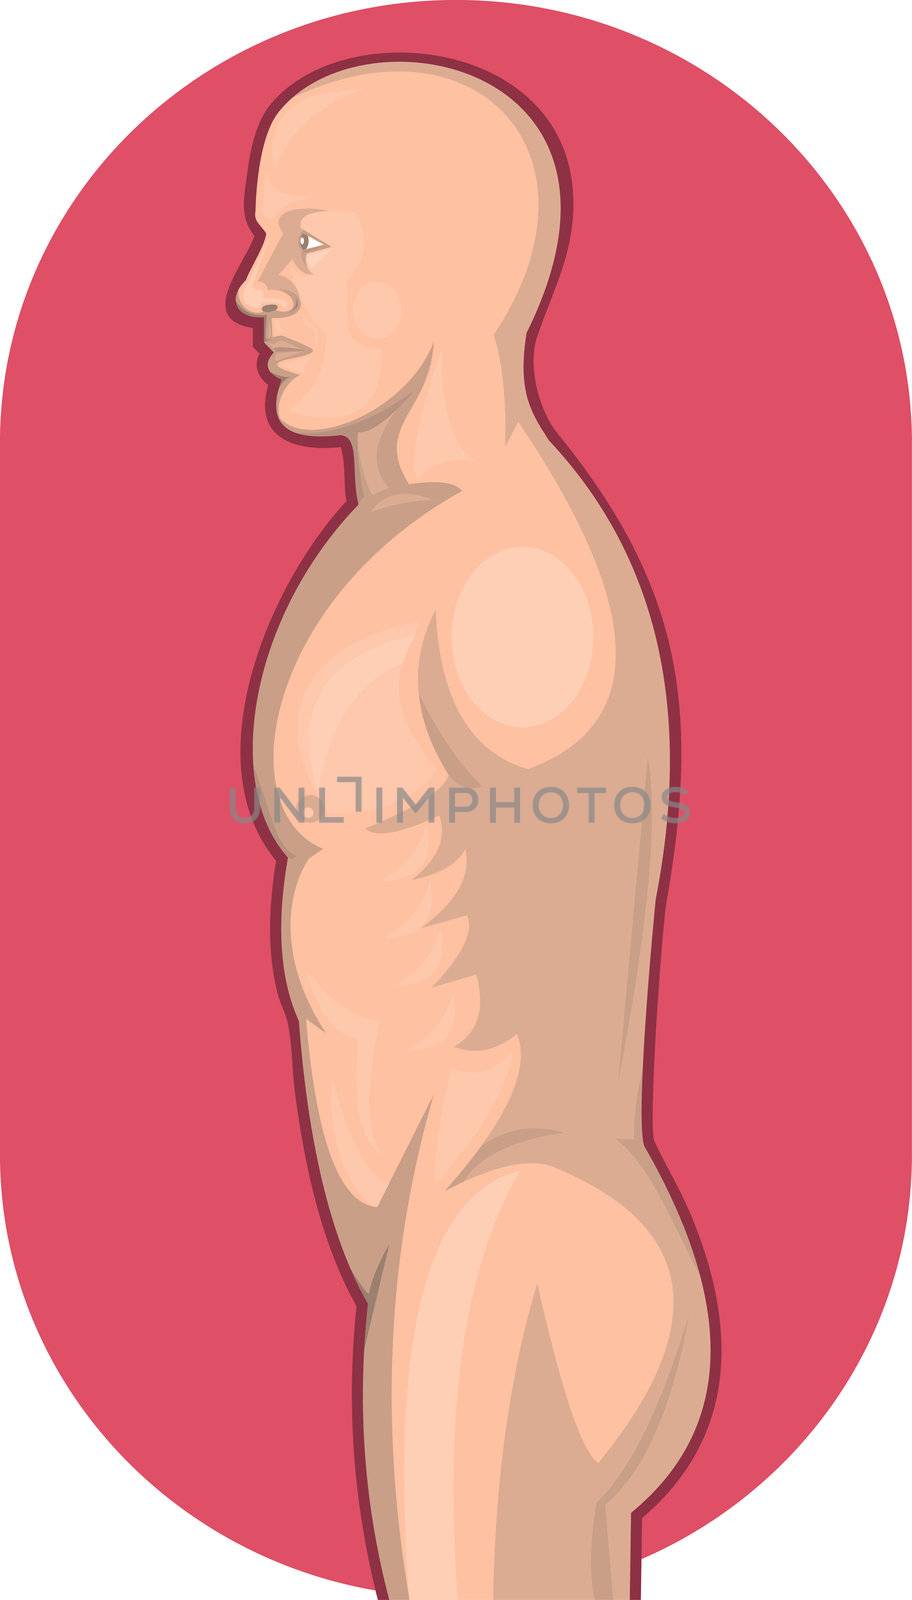 illustration of a Male human anatomy standing side view from waist up